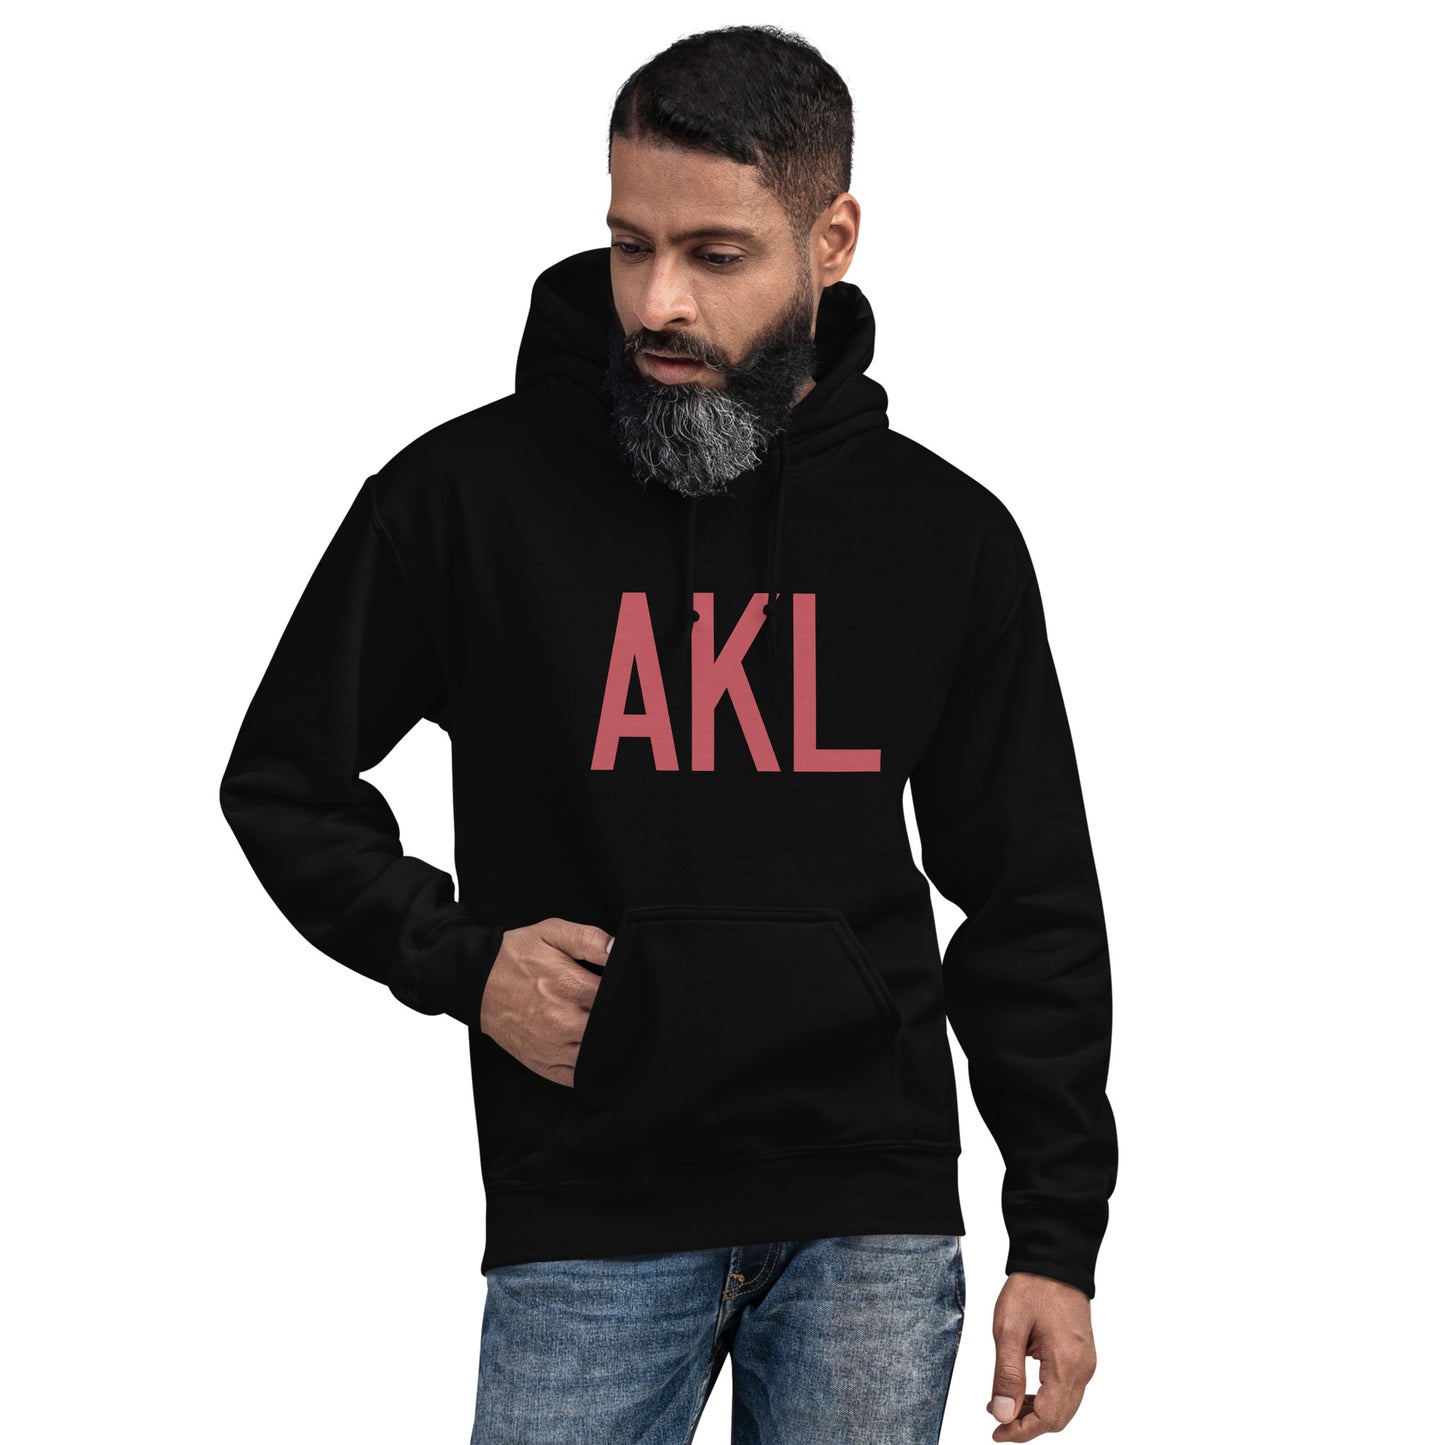 Aviation Enthusiast Hoodie - Deep Pink Graphic • AKL Auckland • YHM Designs - Image 05